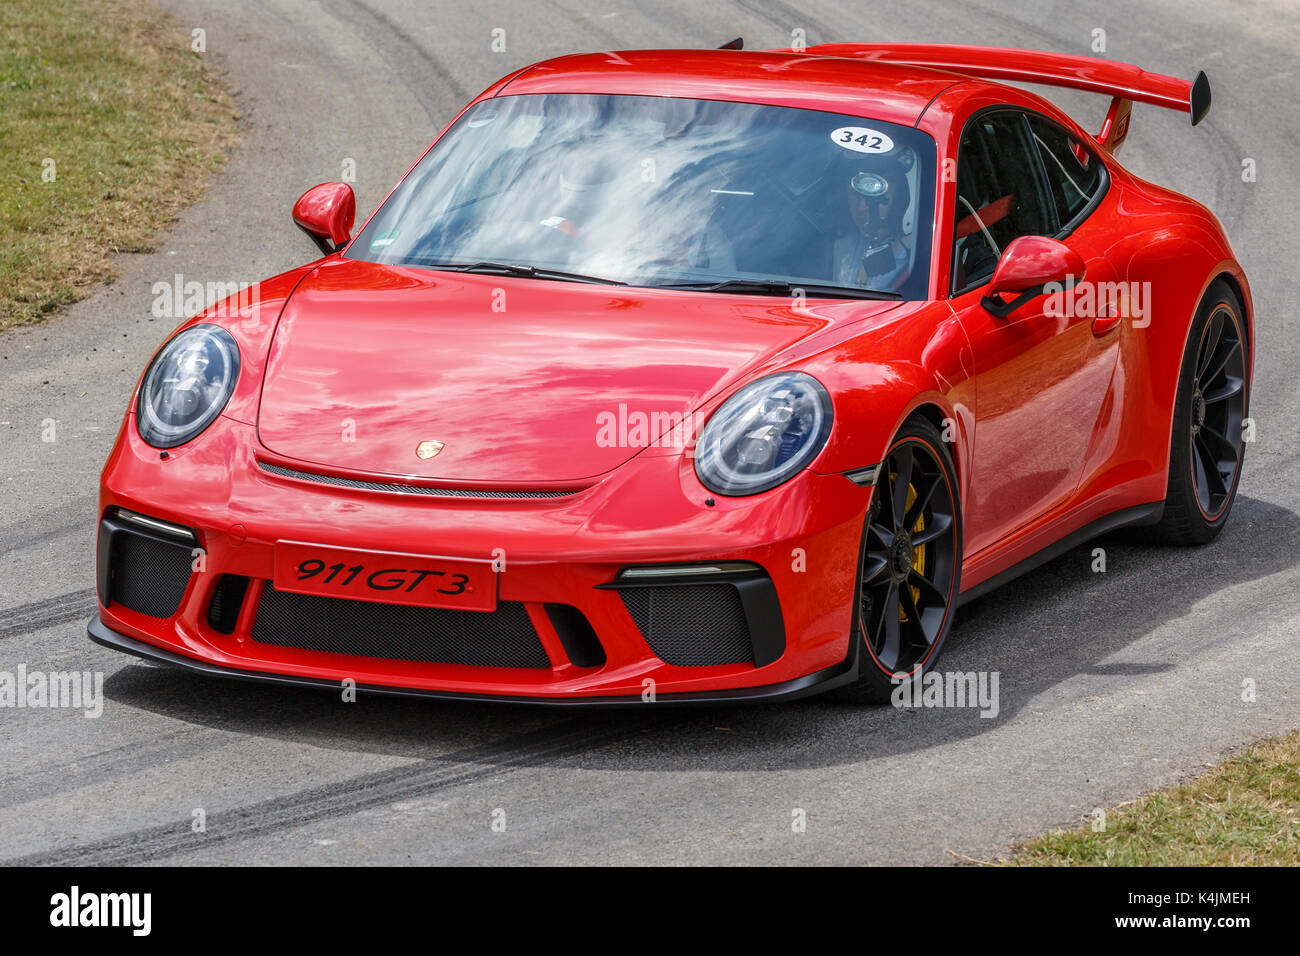 Porsche 911 Gt3 2017 High Resolution Stock Photography and Images - Alamy